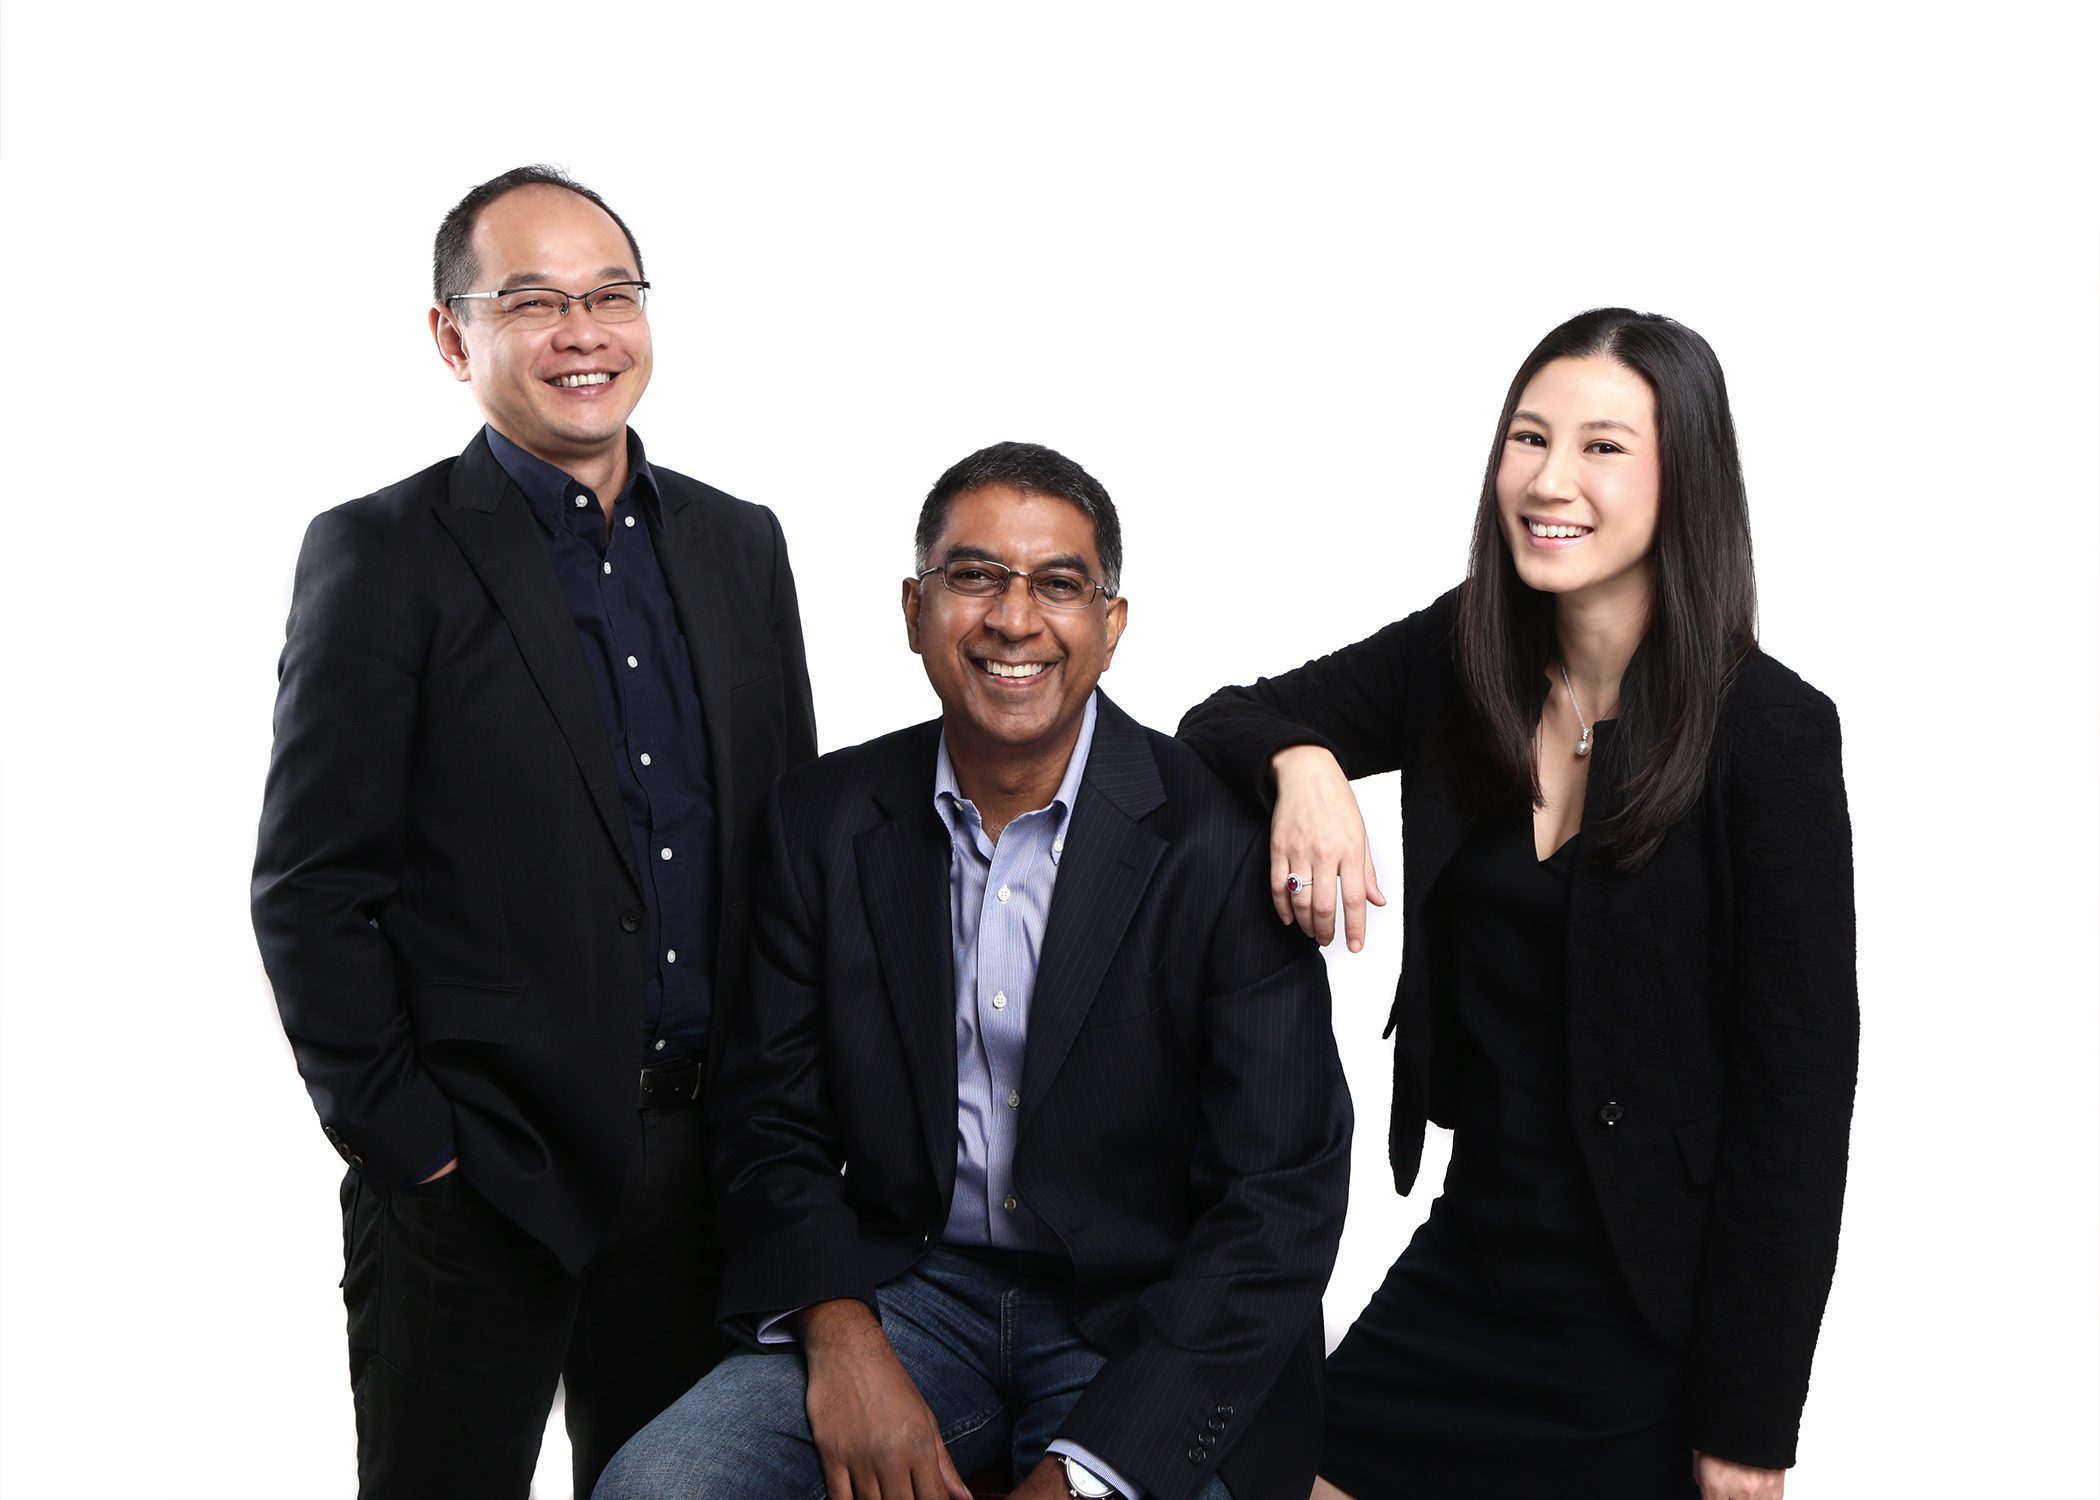 Singapore: E-commerce enabler Shopmatic merges with Octopus, to close Series B soon